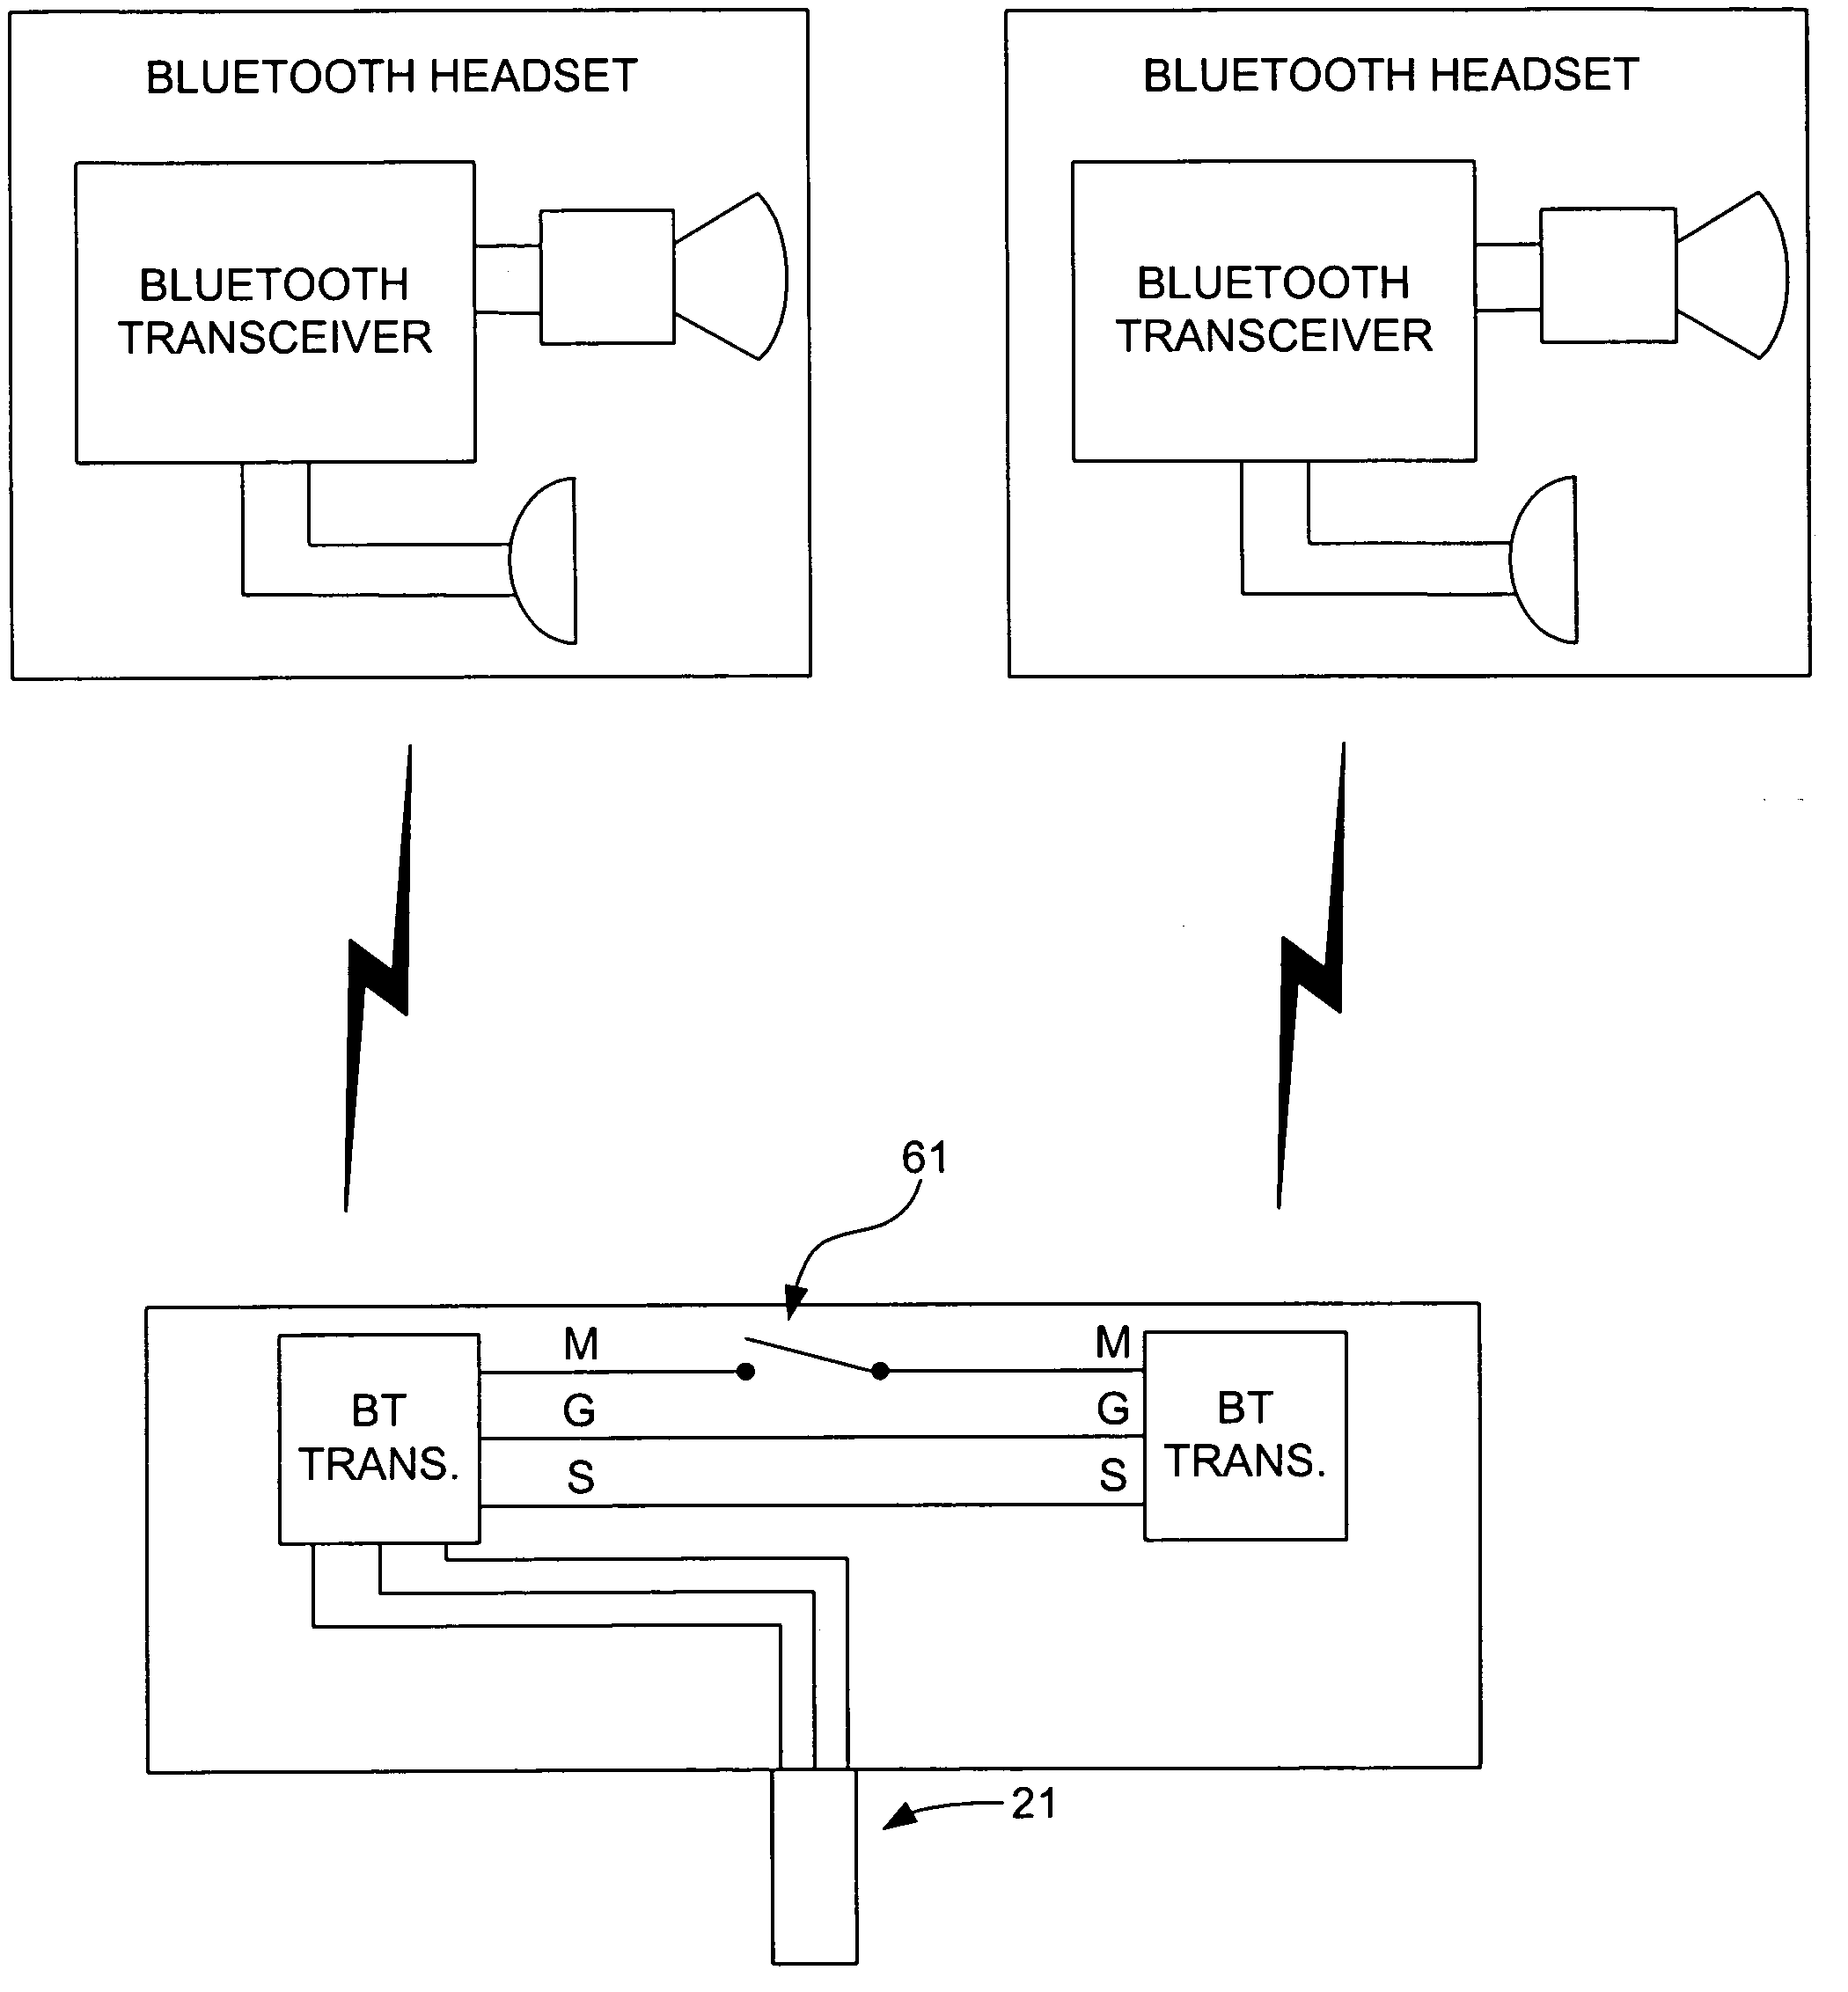 Hands-free conferencing apparatus and method for use with a wireless telephone